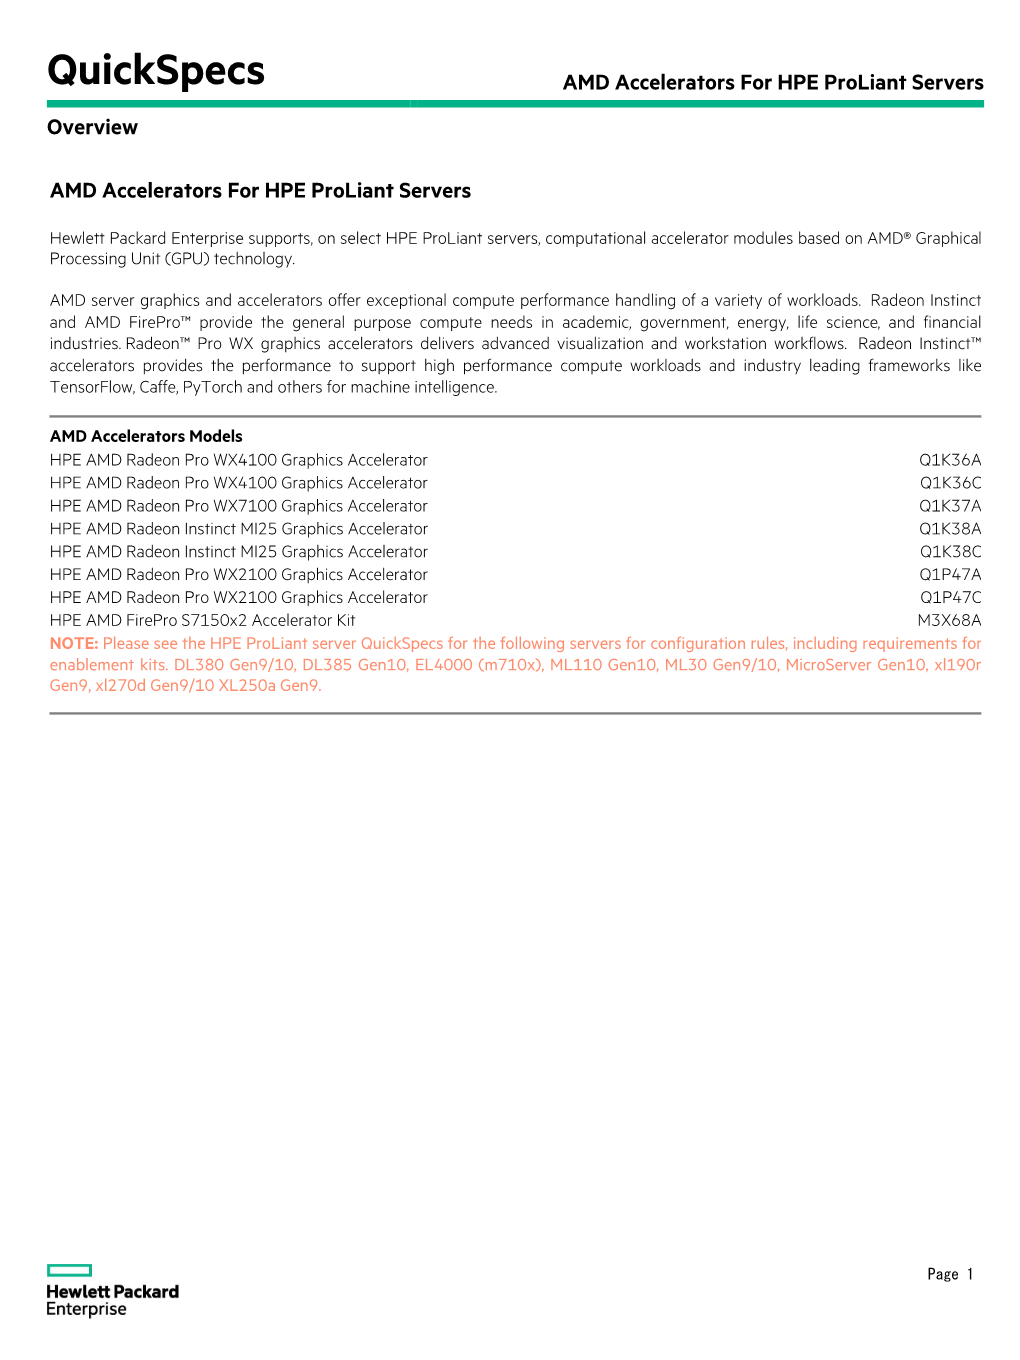 AMD Accelerators for HPE Proliant Servers Overview